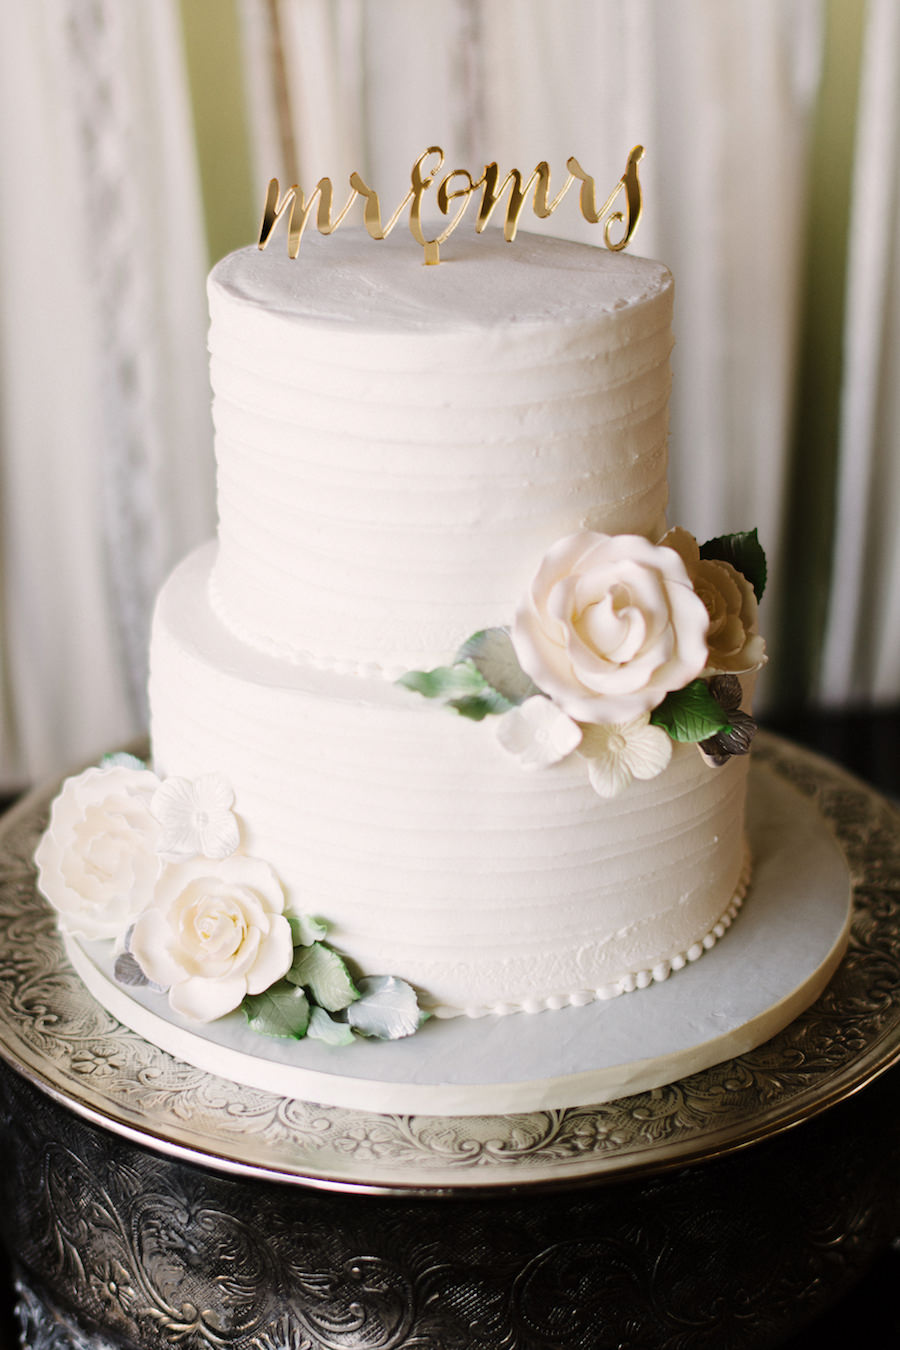 Two Tier Round White Wedding Cake with Ivory Sugar Roses with Mr and Mrs Rustic Cake Topper by Tampa Bay Wedding Bakery Alessi Bakery